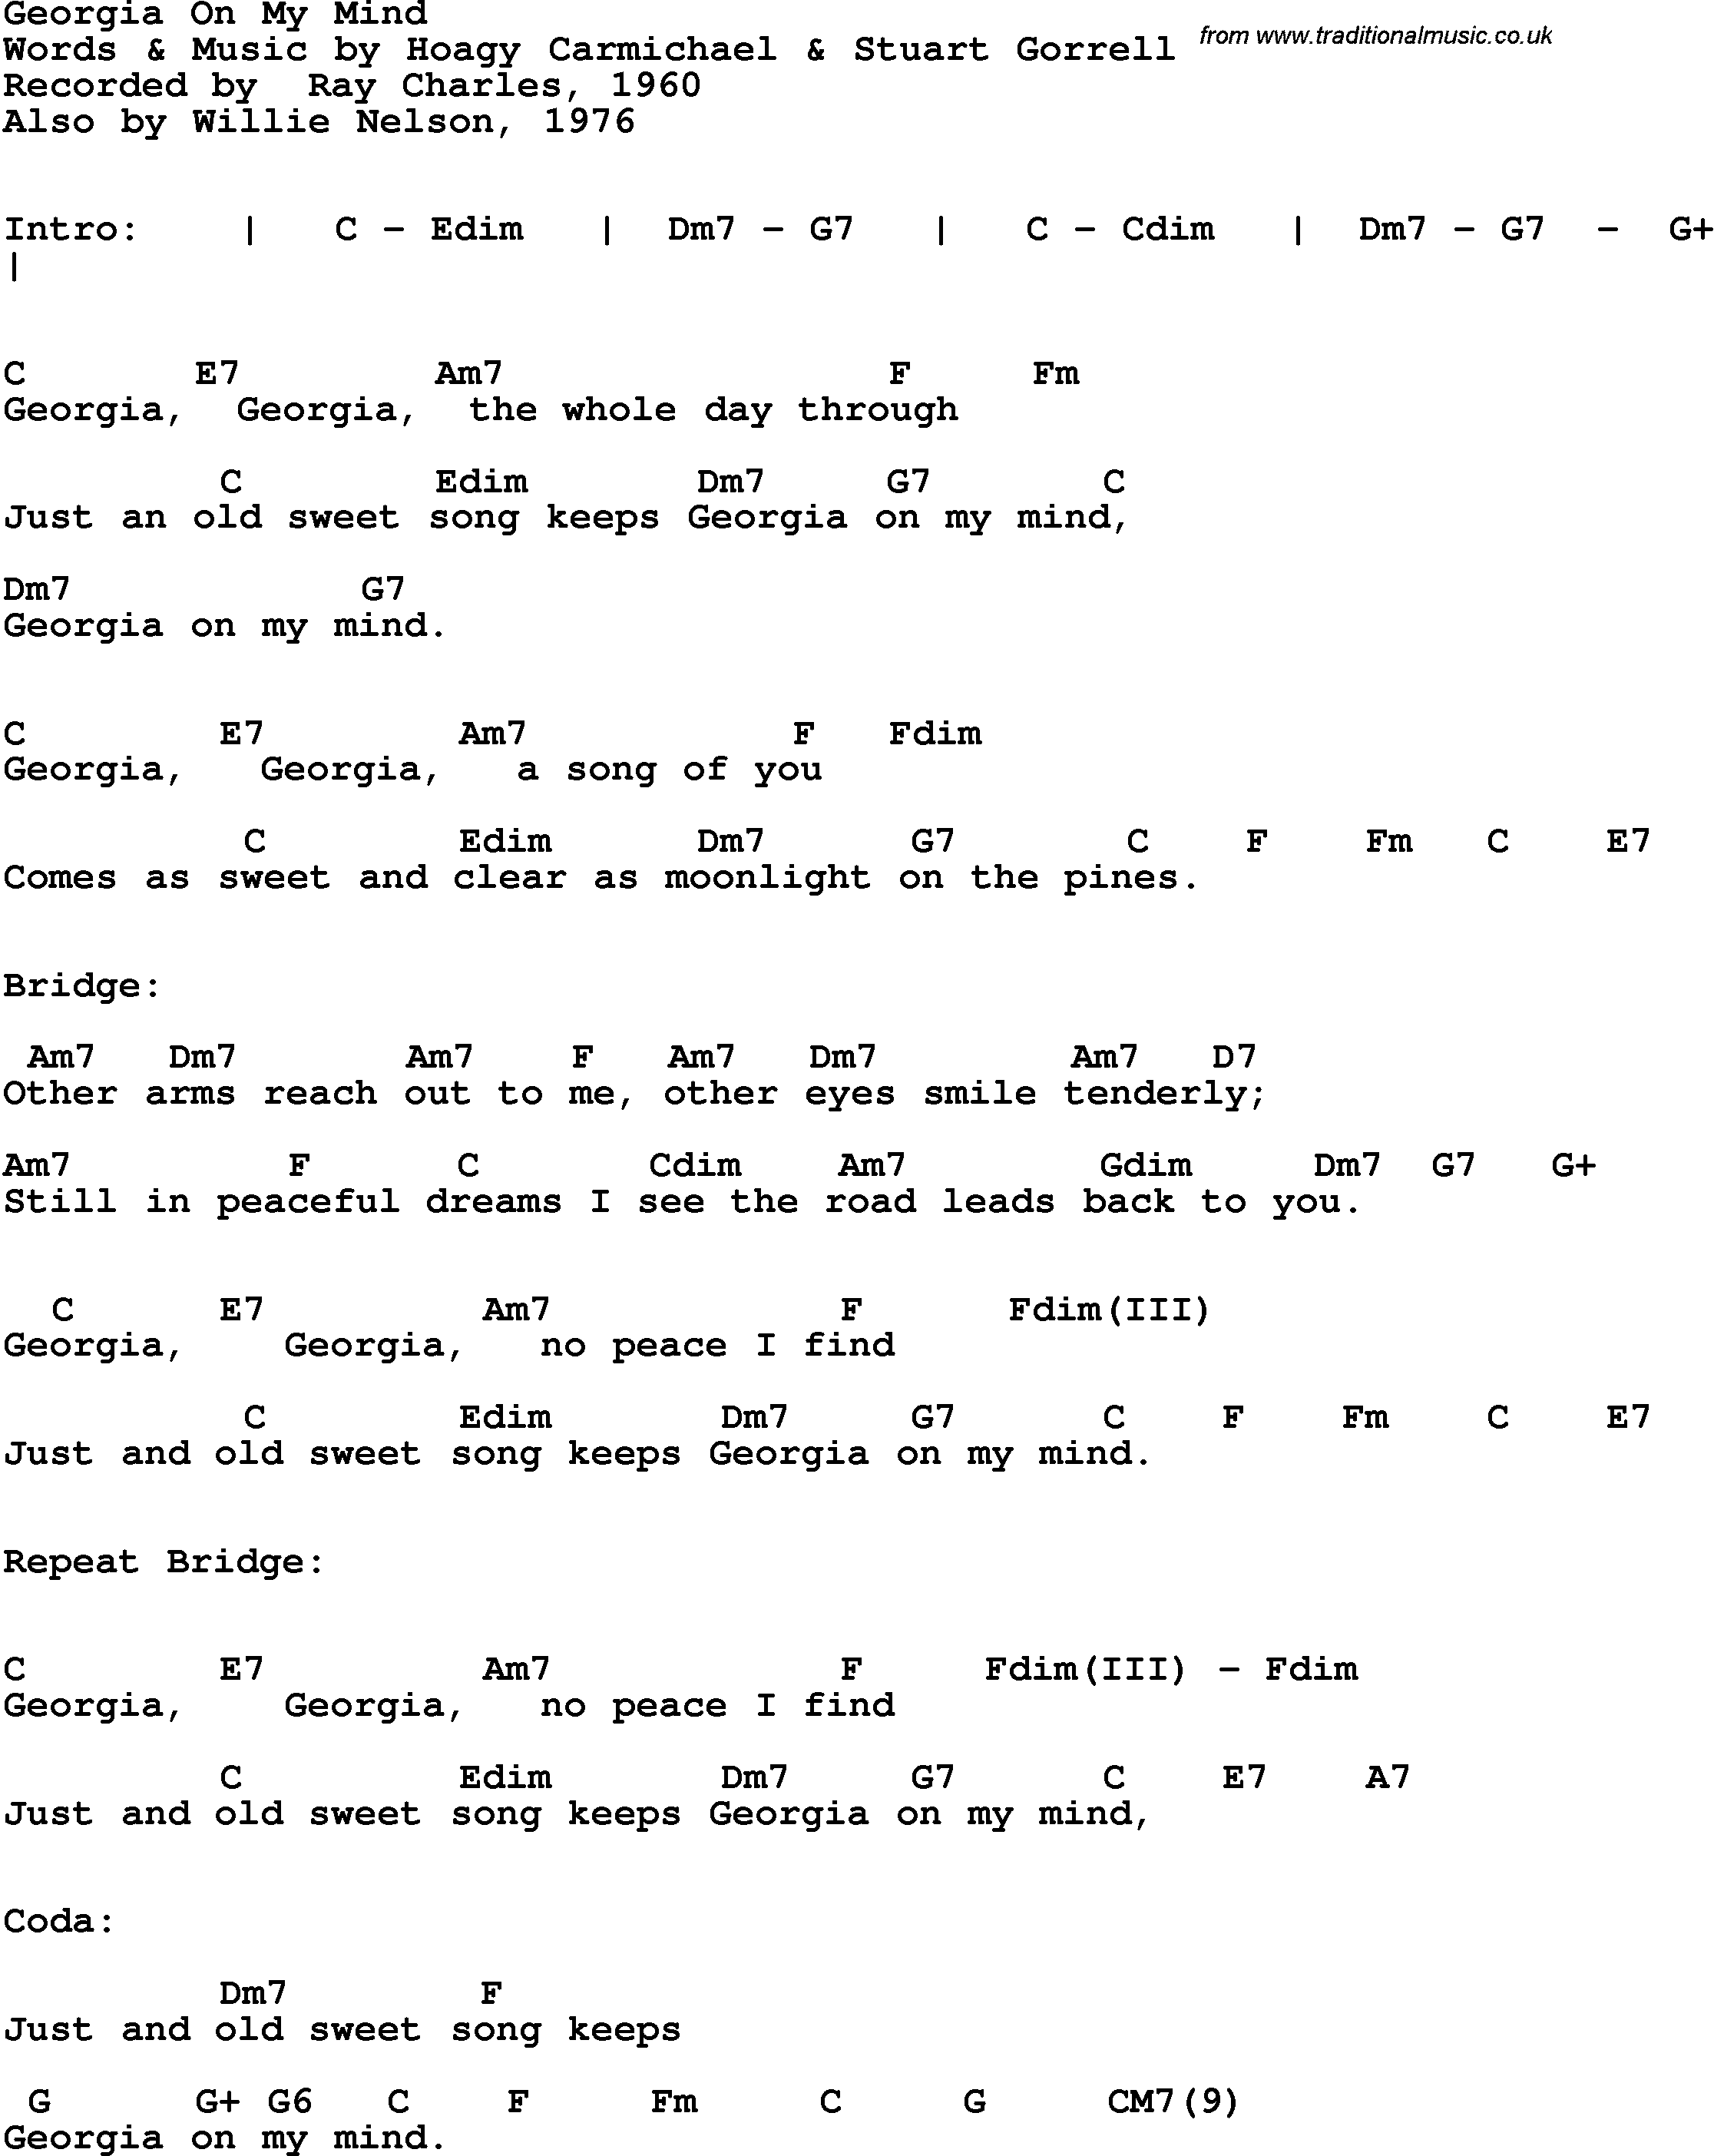 Song Lyrics with guitar chords for Georgia On My Mind - Ray Charles, 1960